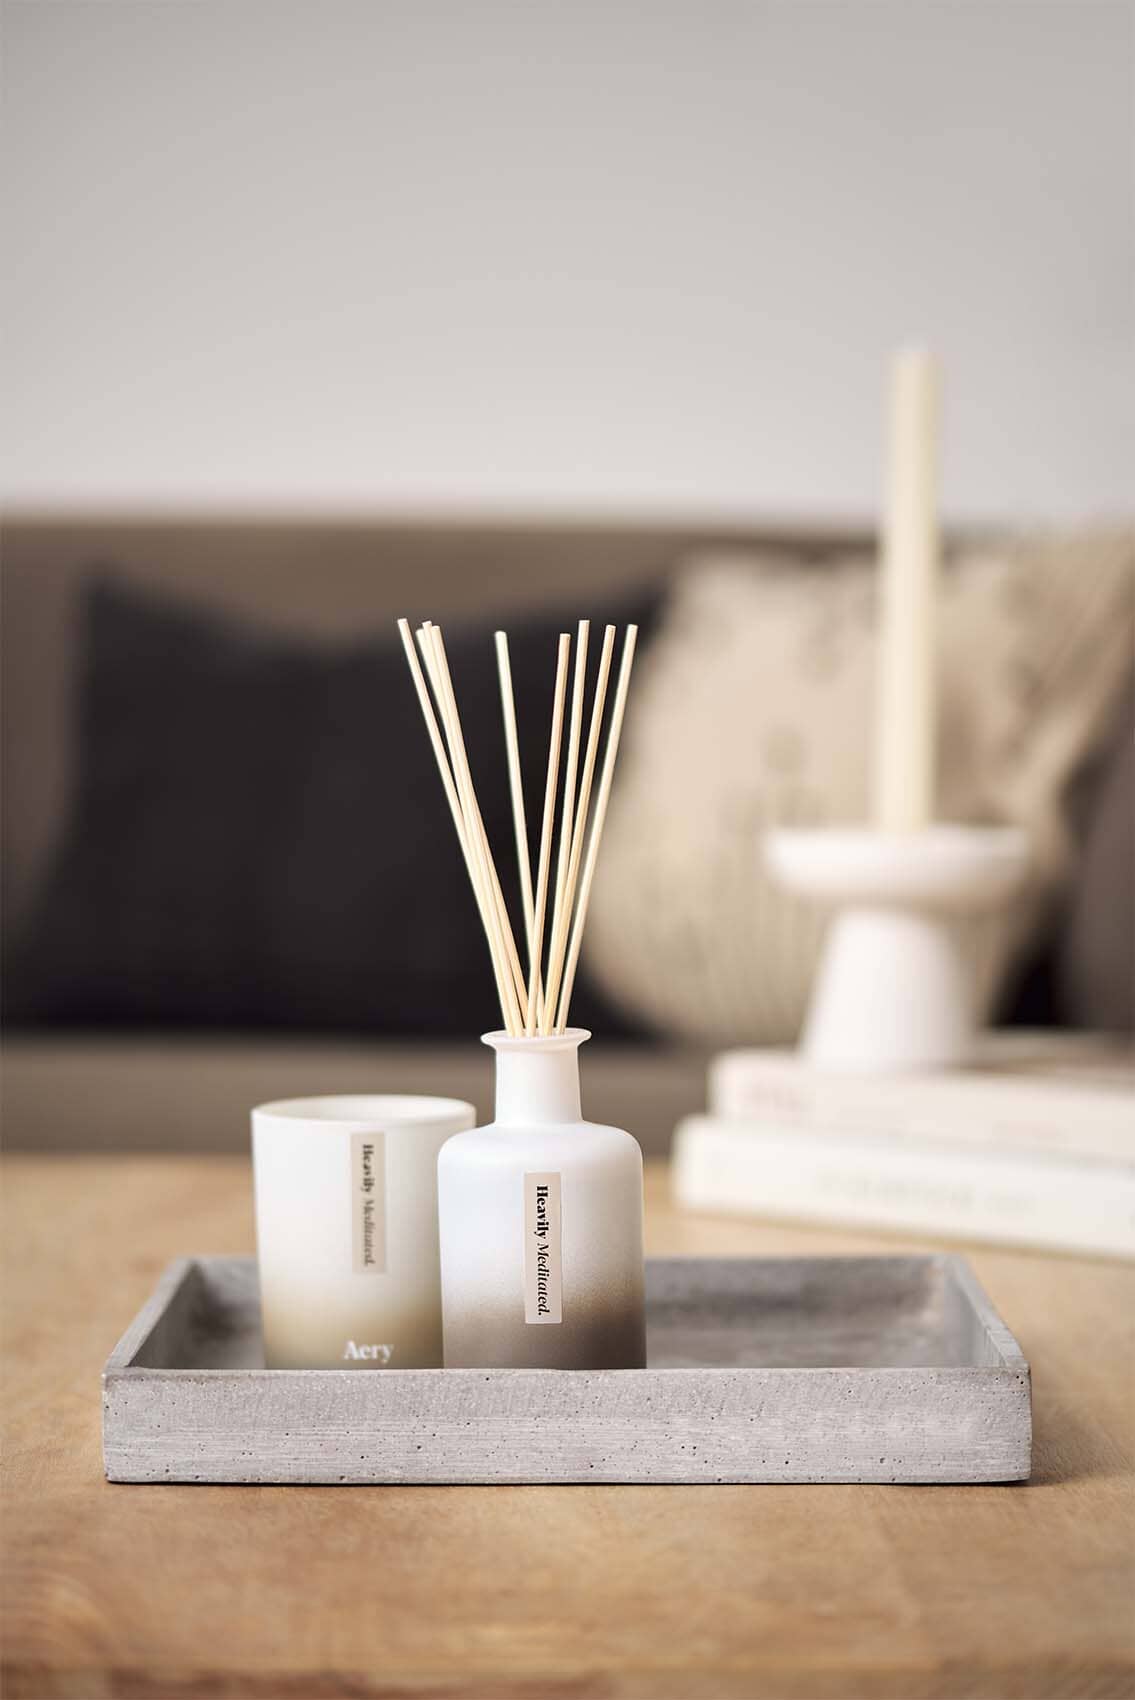 Beige Heavily Meditated diffuser by Aery displayed next to Heavily Meditated candle placed in grey tray on brown table 